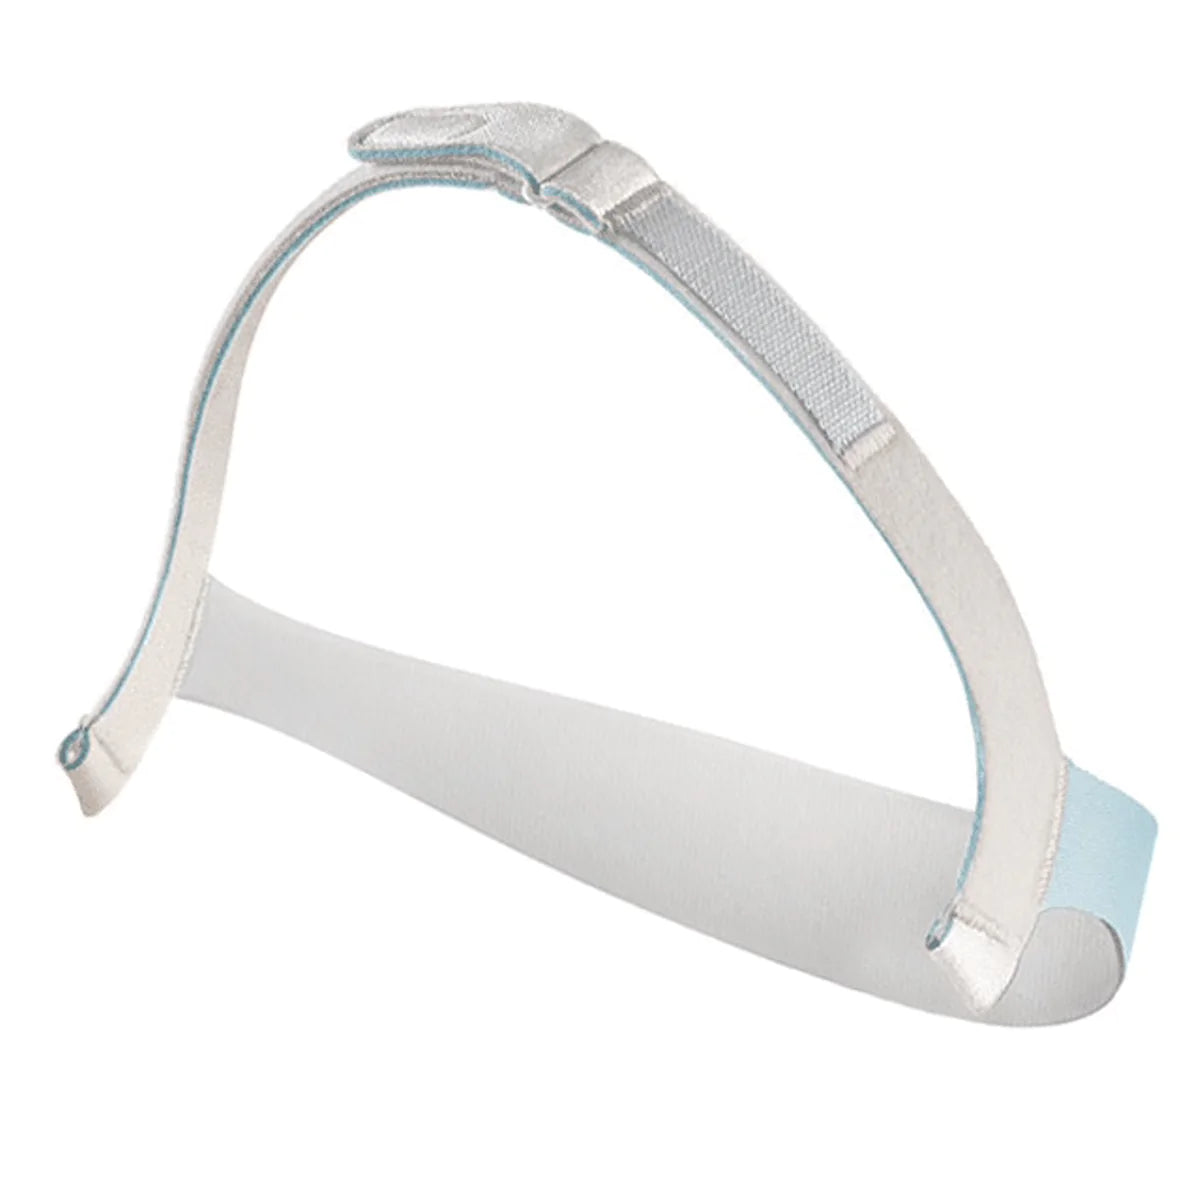 Nuance Pro and Nuance Gel Nasal Pillow Mask Headgear